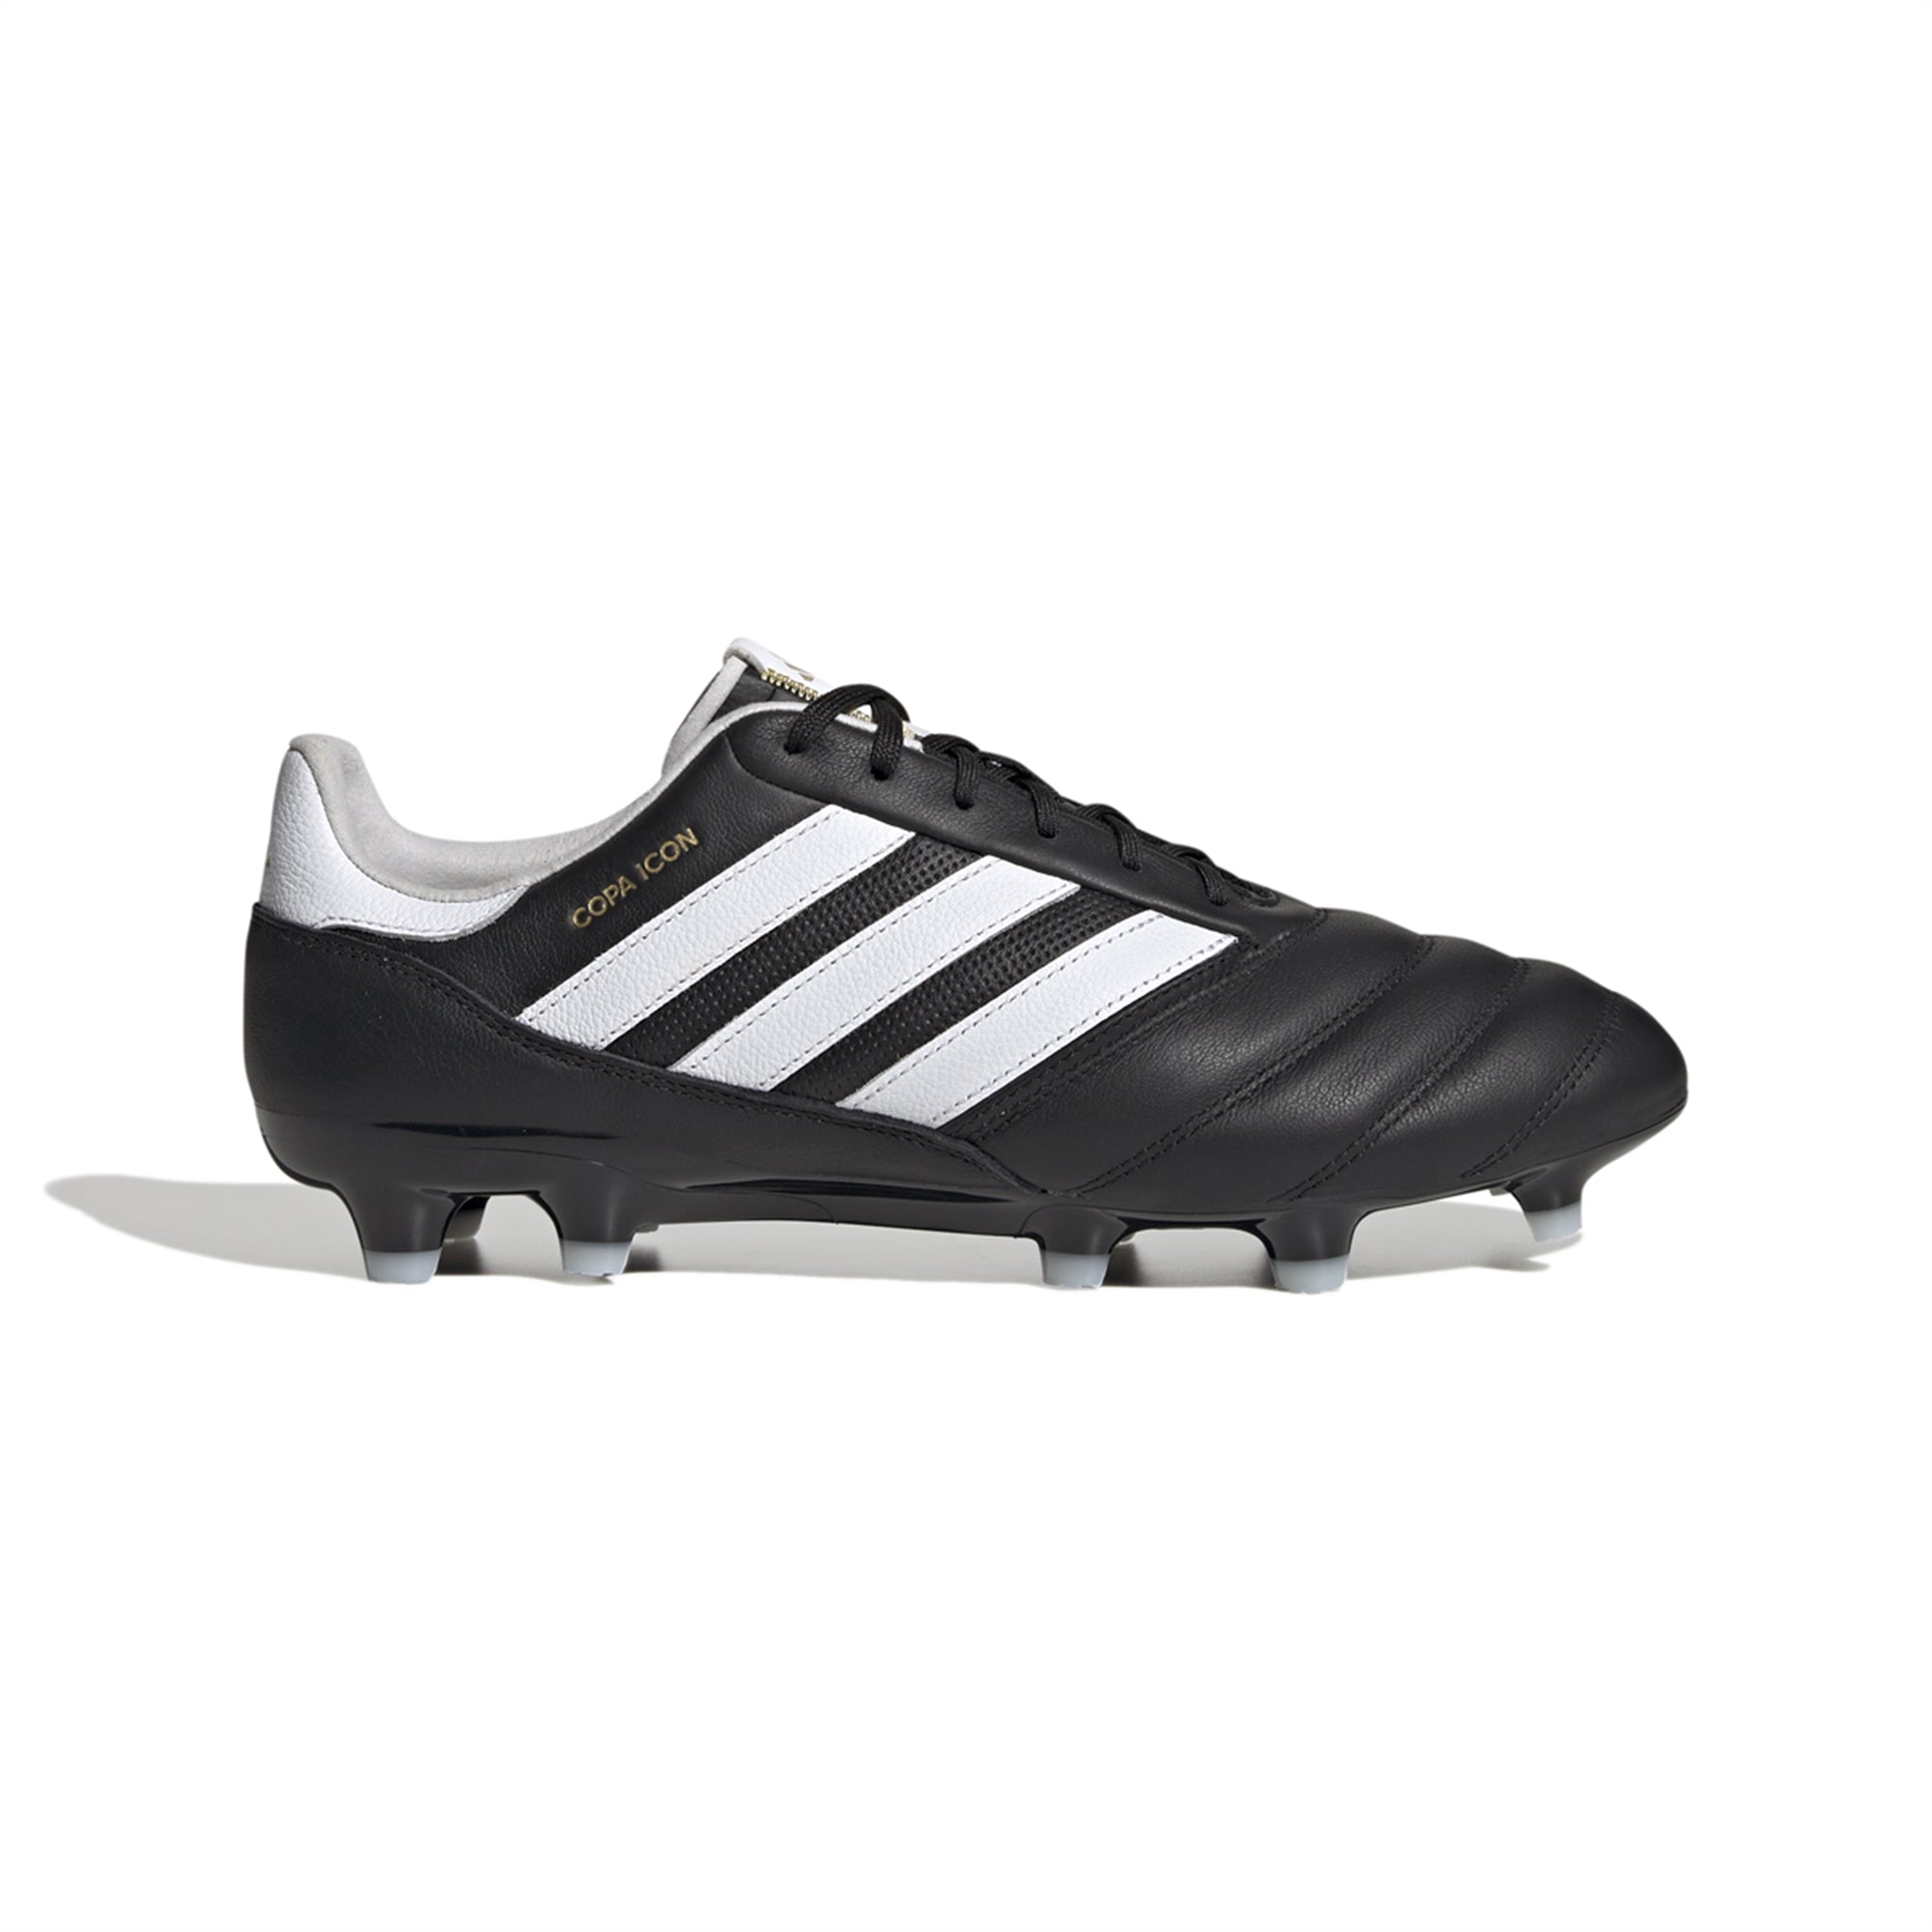 Aprendizaje flor productos quimicos adidas Copa Icon FG Firm Ground Soccer Cleats - Black/White/Gold HQ1033 –  Soccer Zone USA